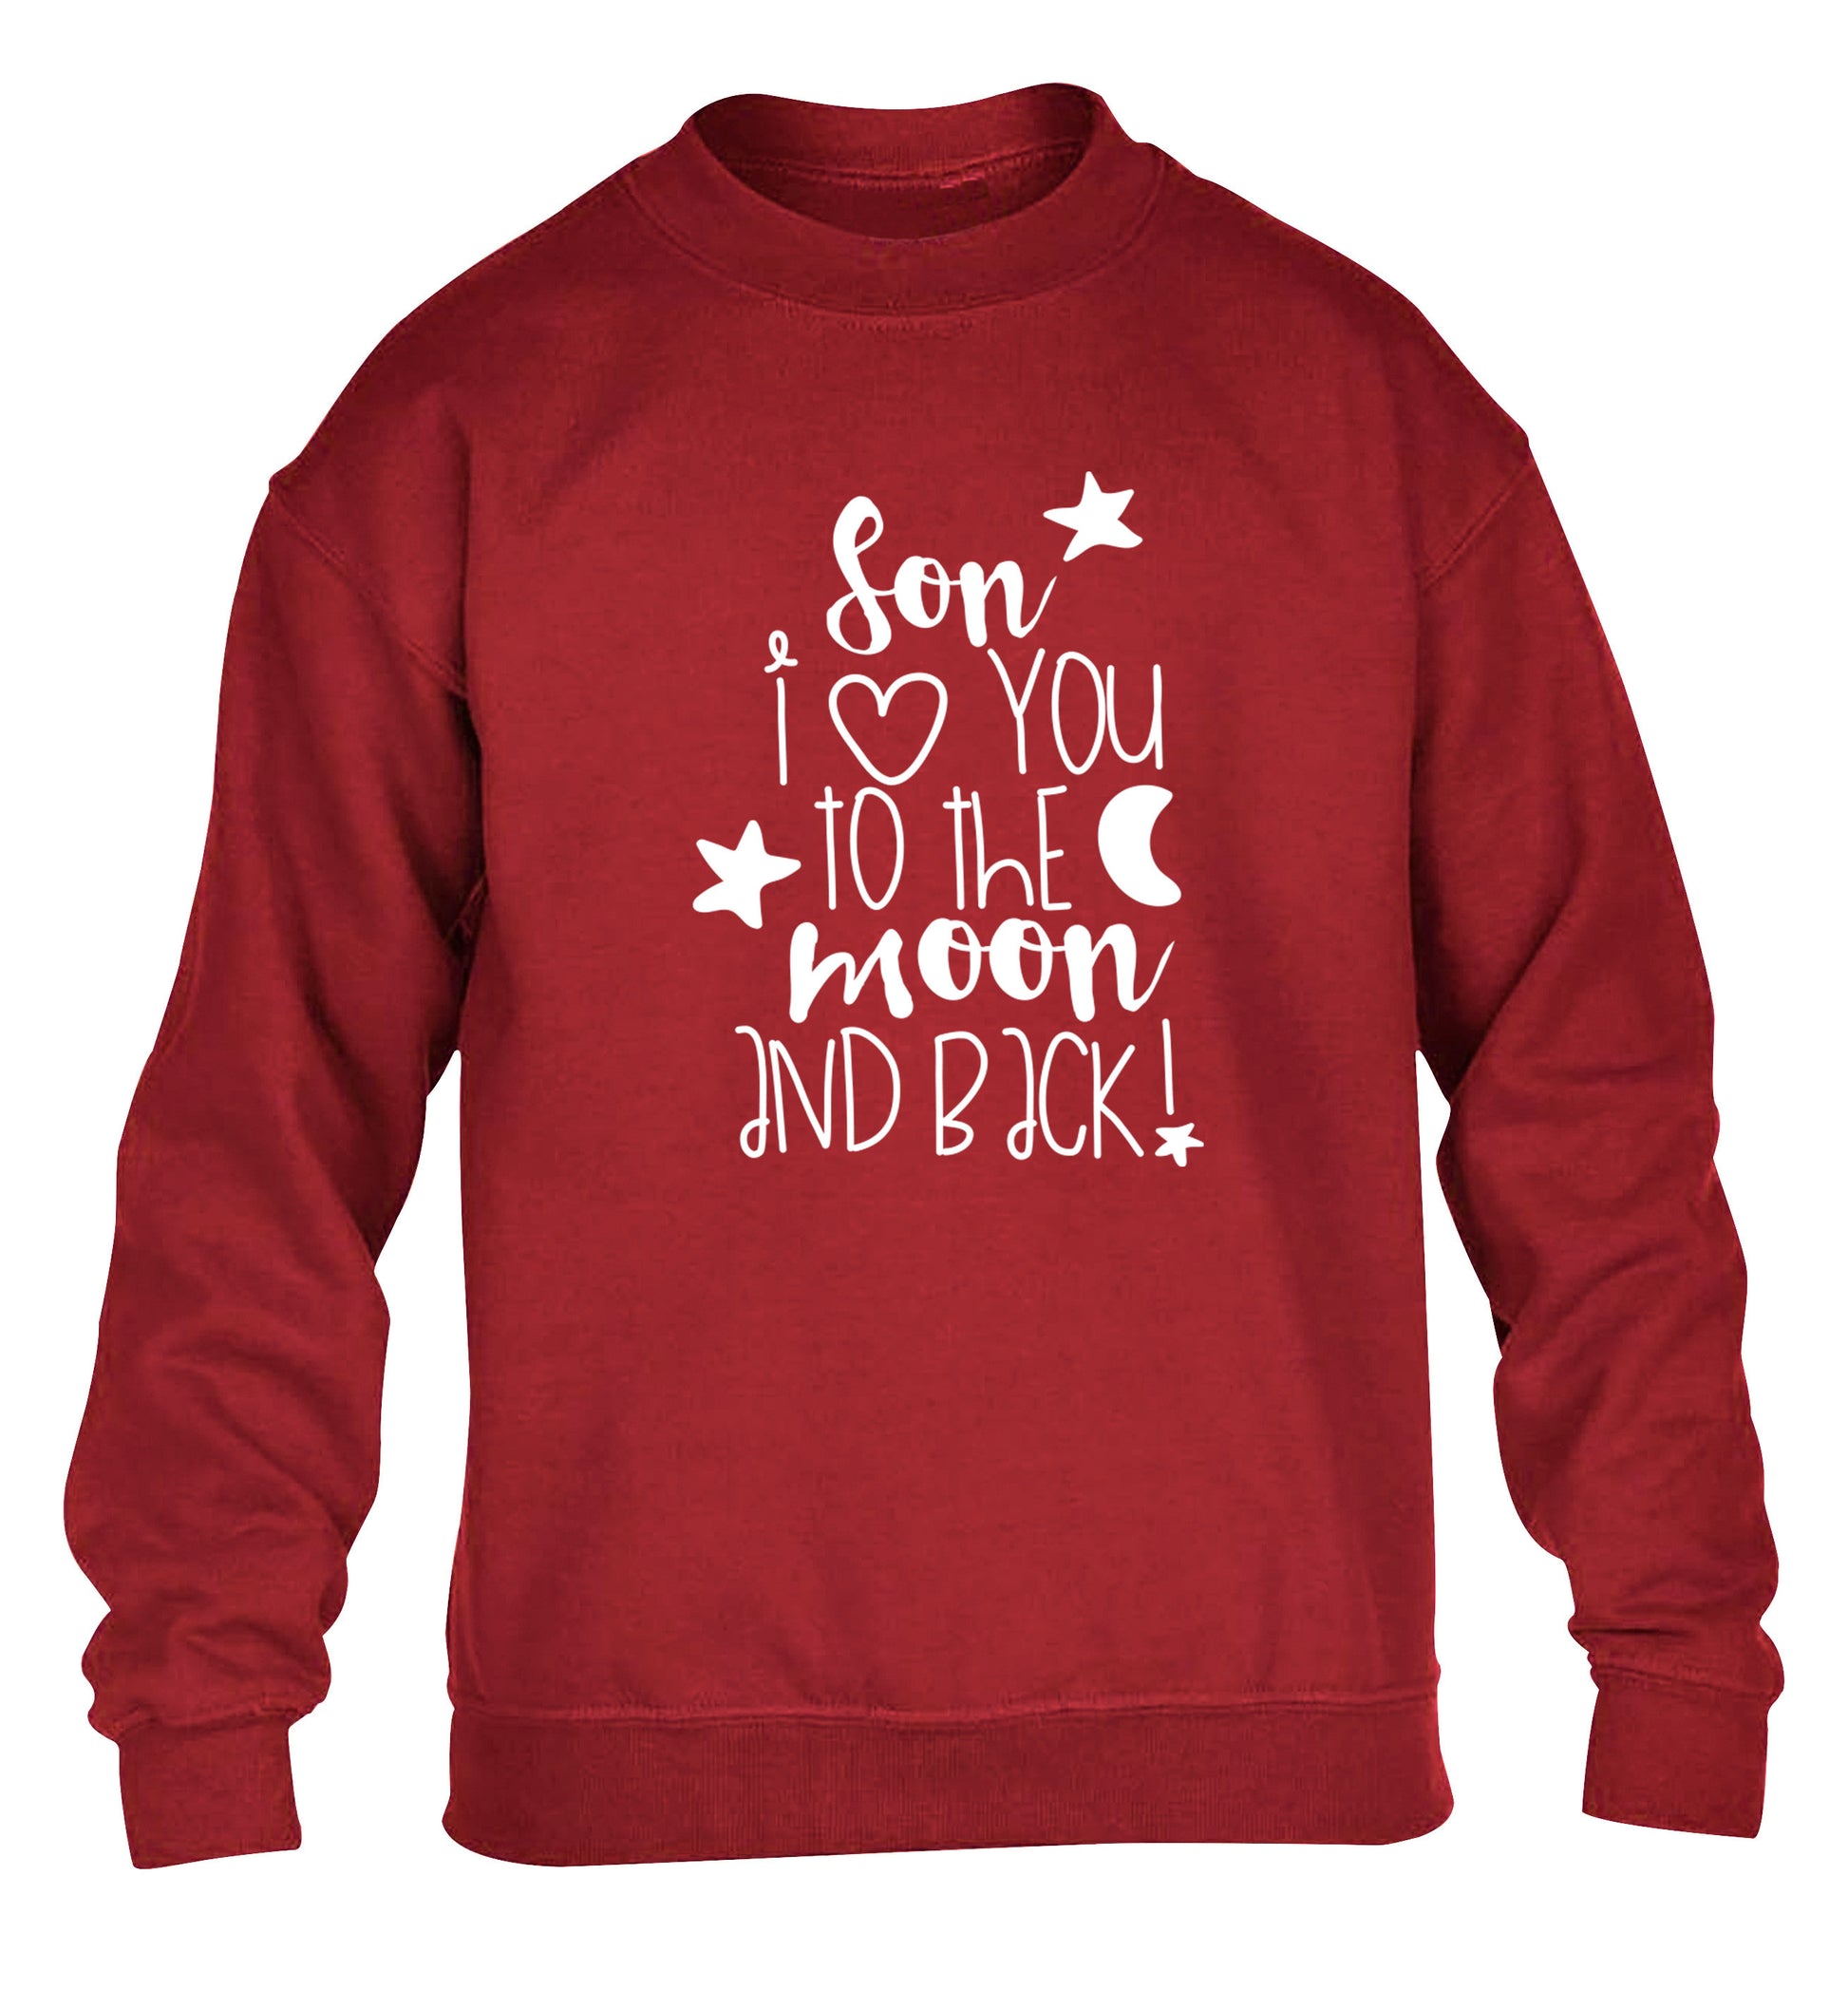 Son I love you to the moon and back children's grey  sweater 12-14 Years